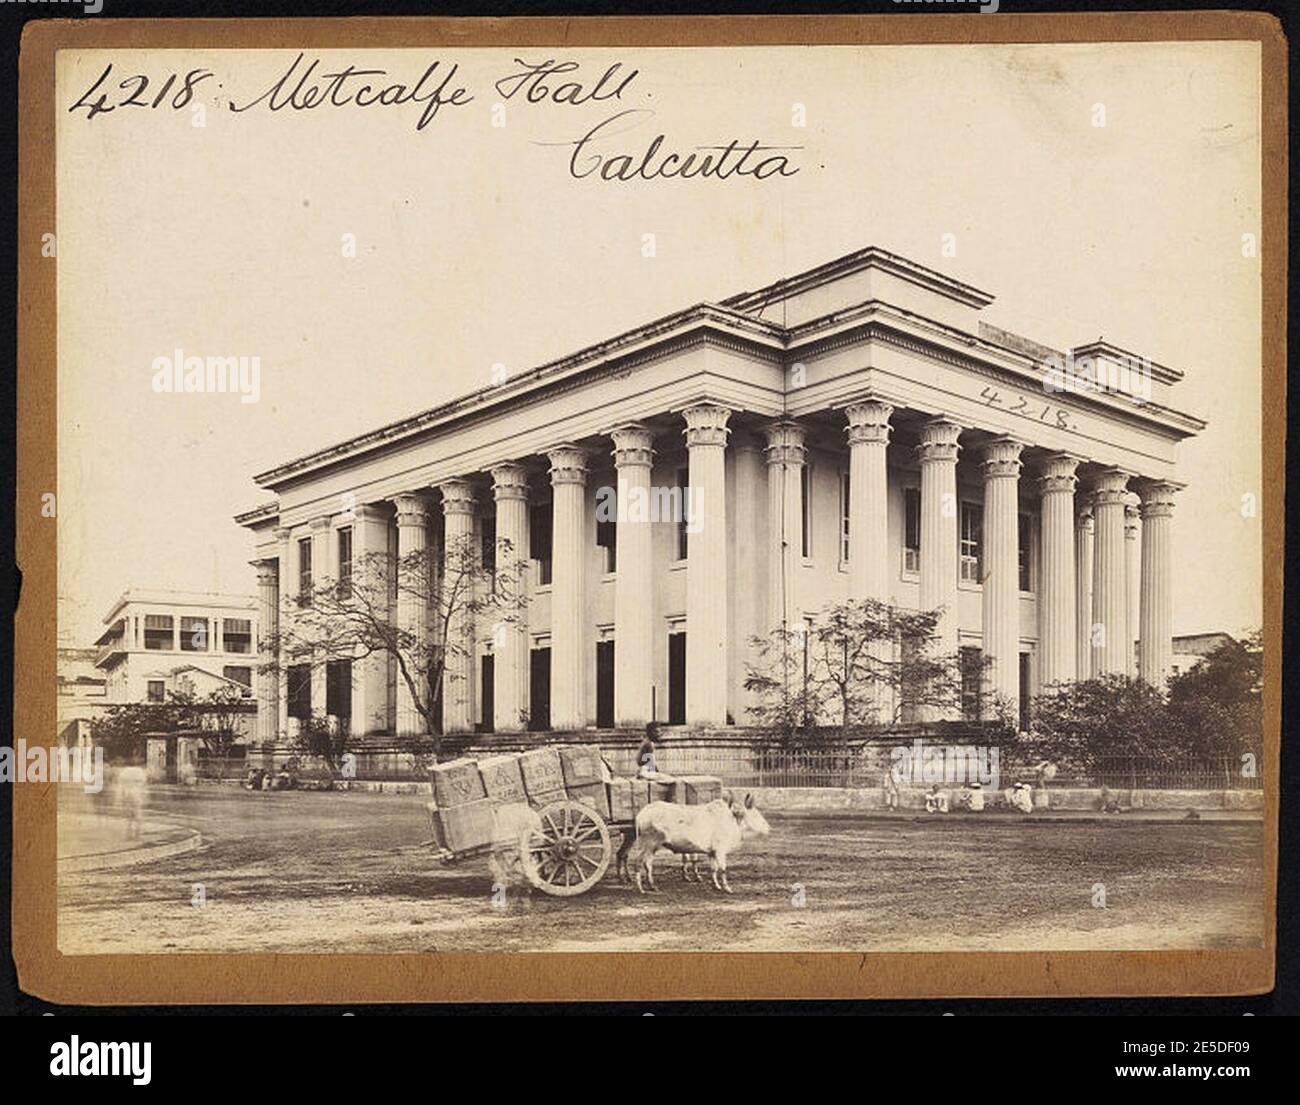 Metcalfe Hall, Calcutta by Francis Frith. Stock Photo